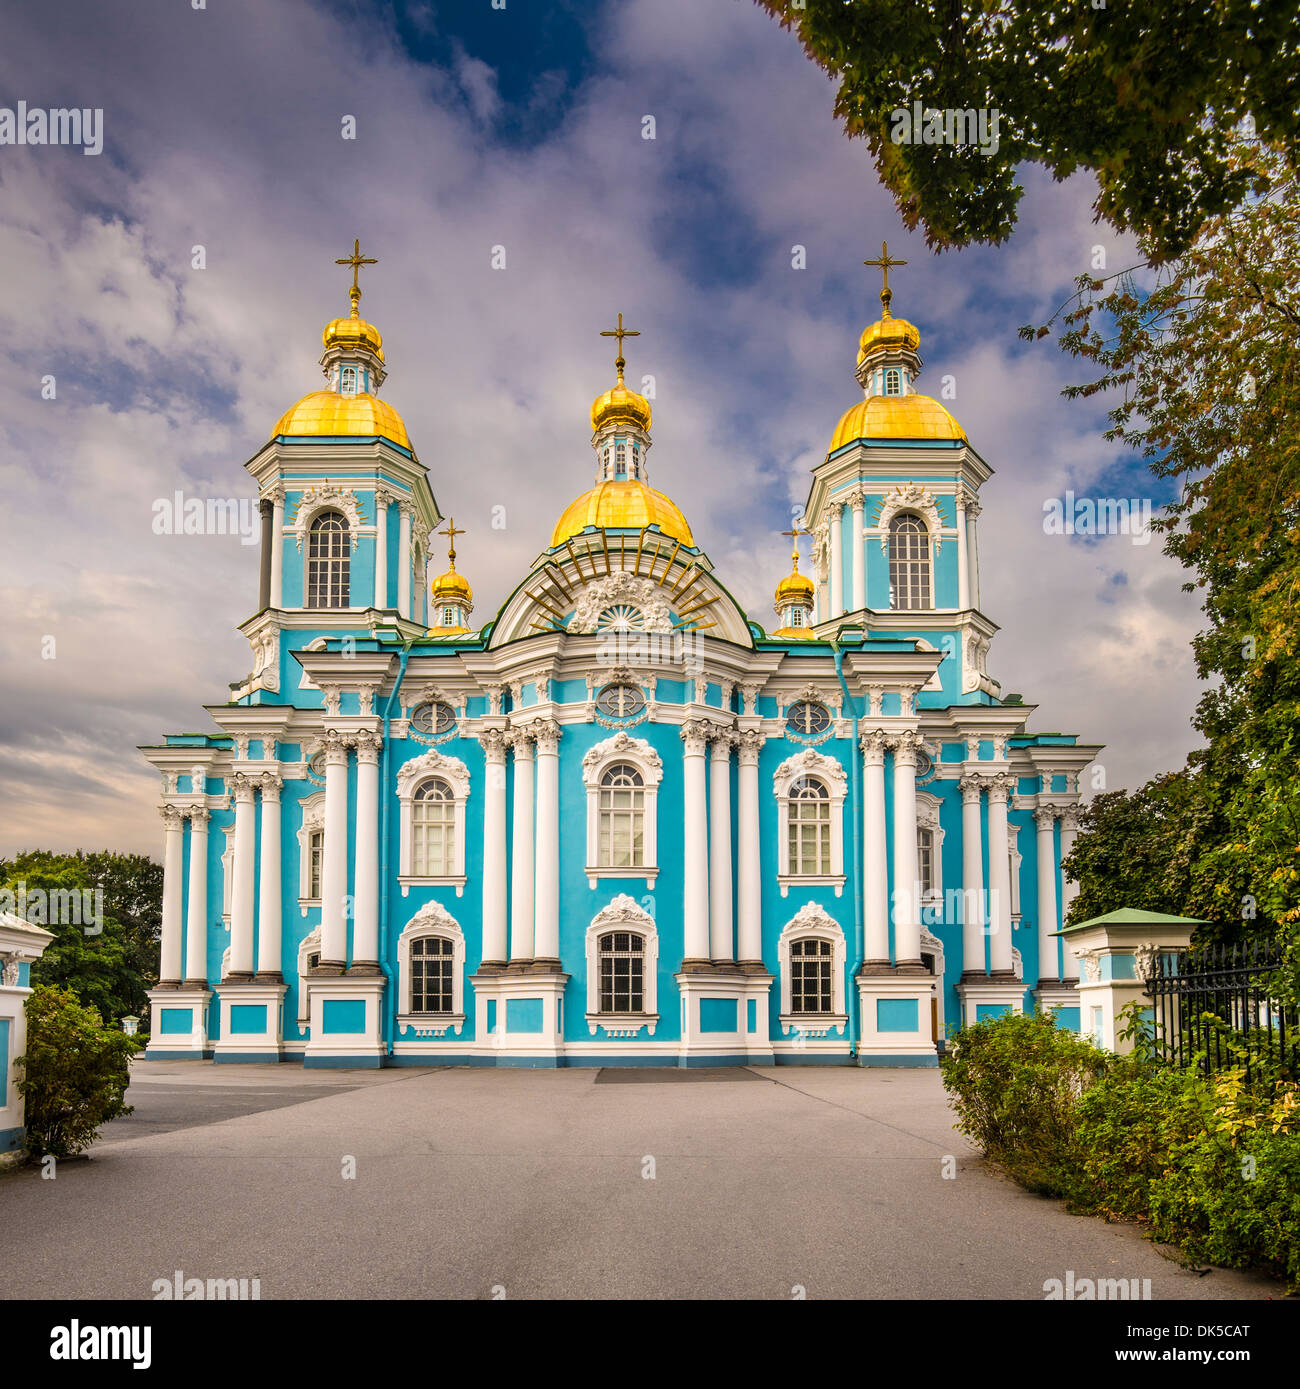 St. Nicholas Naval Cathedral in St. Petersburg, Russia. Stock Photo